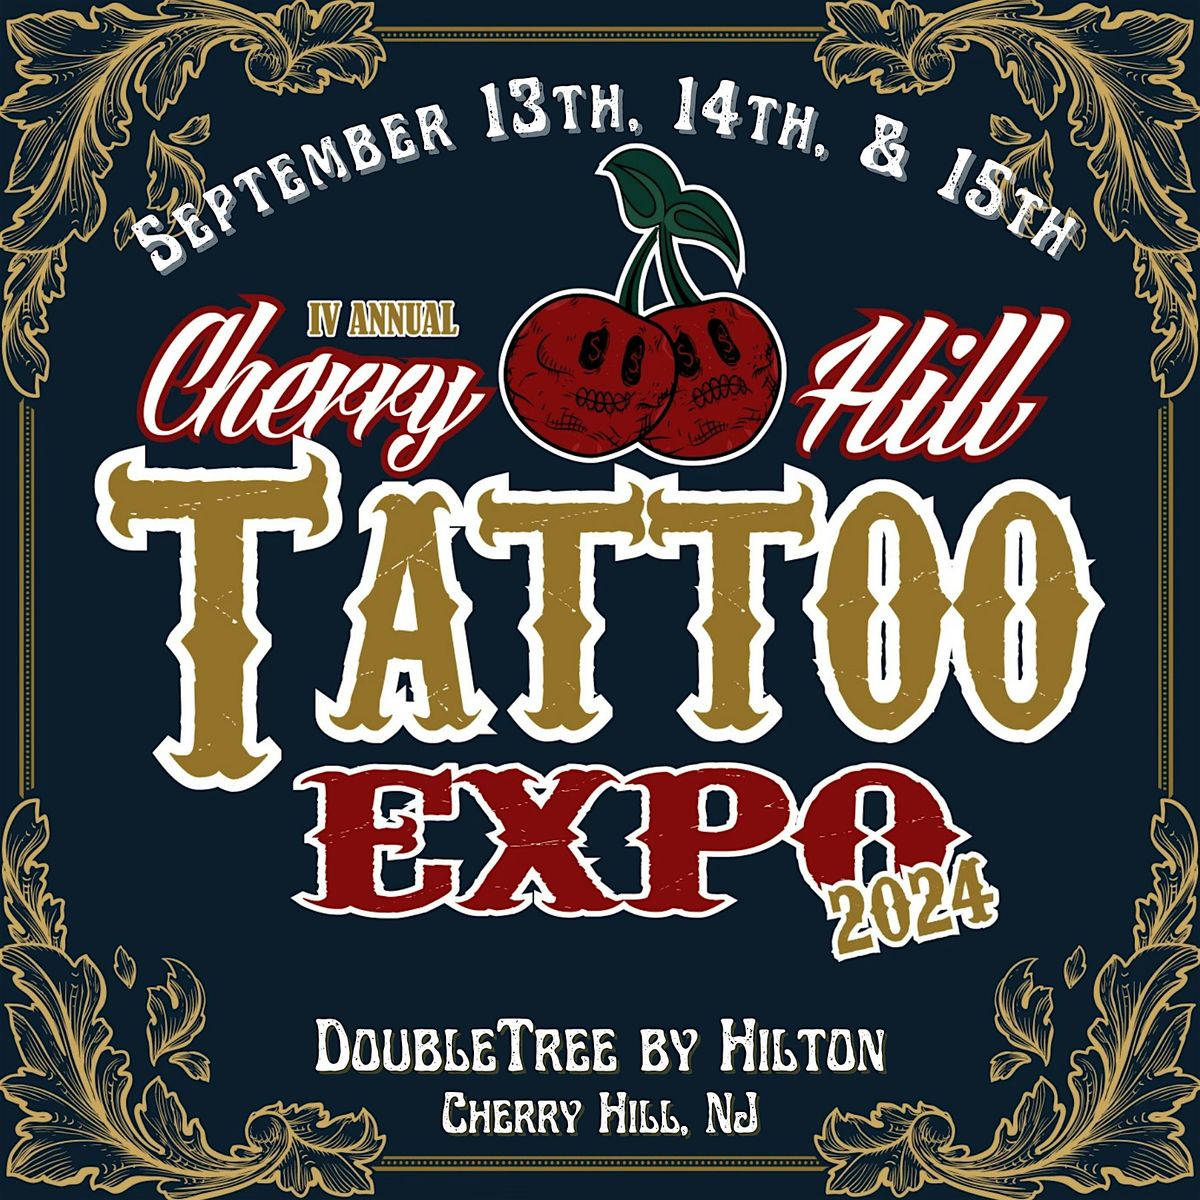 The 4th Annual Cherry Hill Tattoo Expo